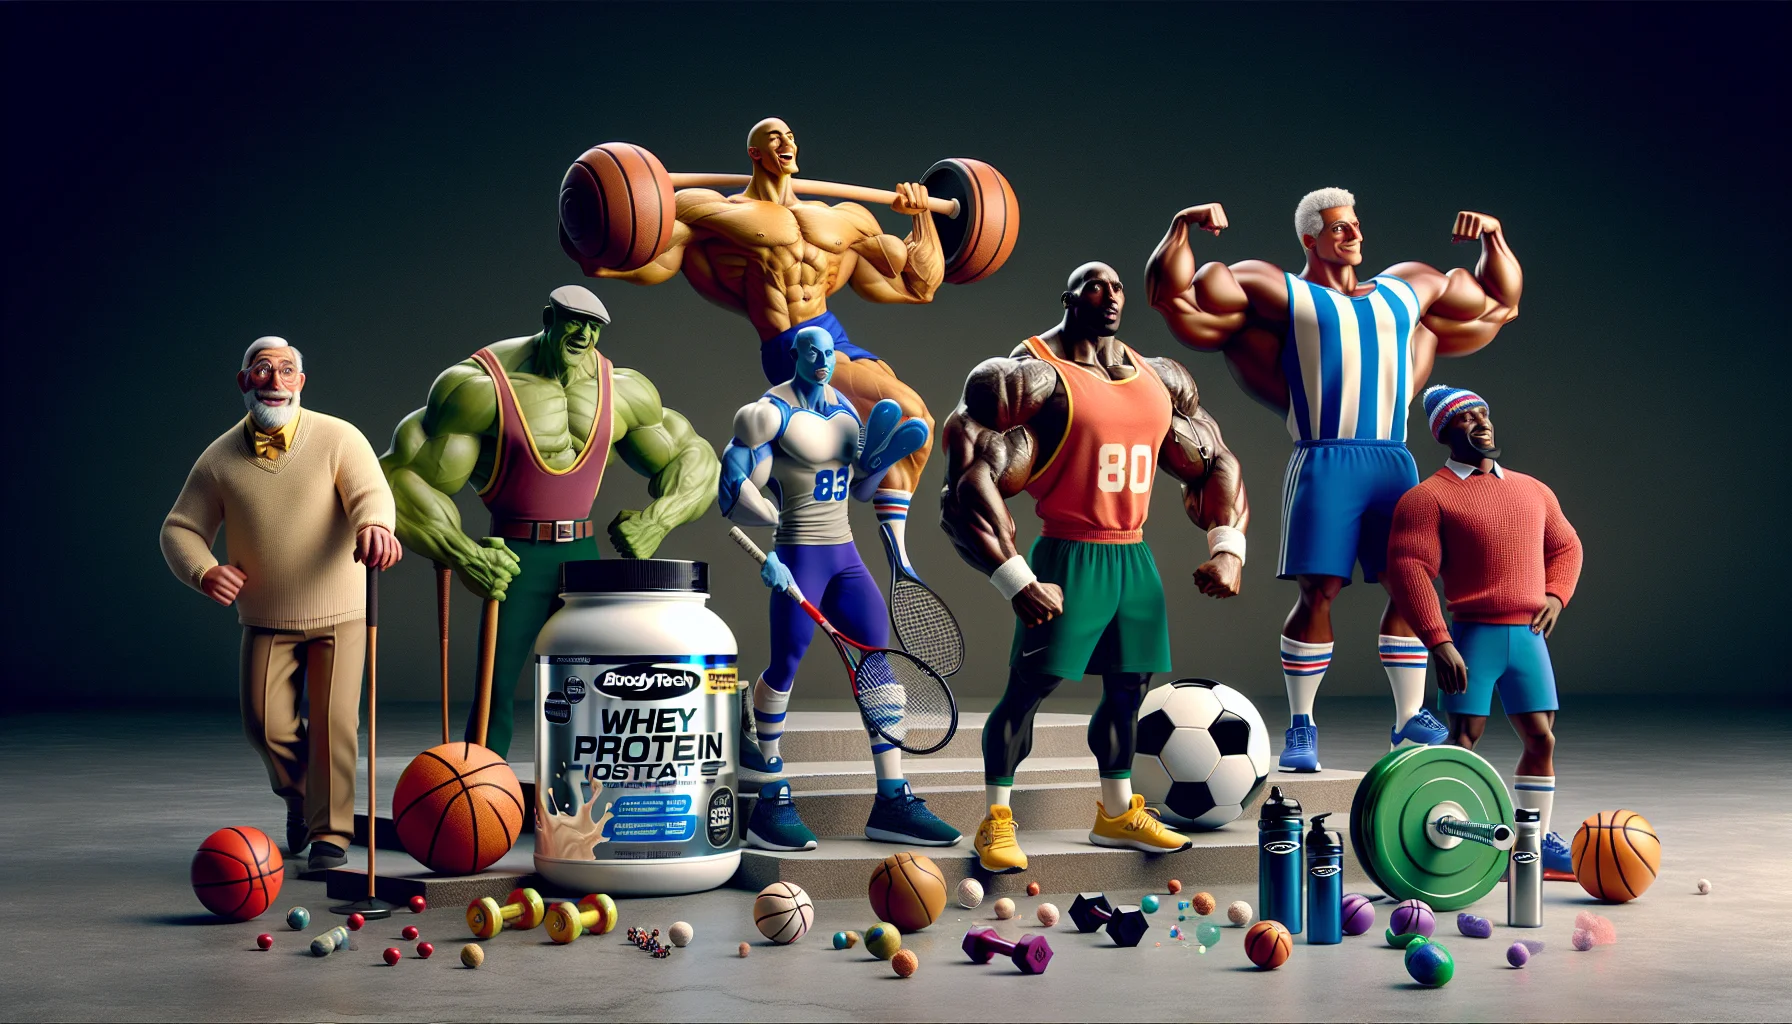 Illustrate an amusing scene where a group of anthropomorphic sports equipment, such as a basketball with muscular arms, a baseball bat with flexed biceps, and a soccer ball with robust legs, are showcasing their strength gained from Bodytech Whey Protein Isolate. Their toned physique draws the attention of amazed human sports enthusiasts - a young Hispanic woman in her jogging outfit, an elderly Caucasian man dressed for a game of tennis, a Black bodybuilder in his gym attire, and a Middle-Eastern skateboarder. The products, prominently displayed, promise the same results for their human counterparts, adding a humorous incentive to include supplements in their routines.